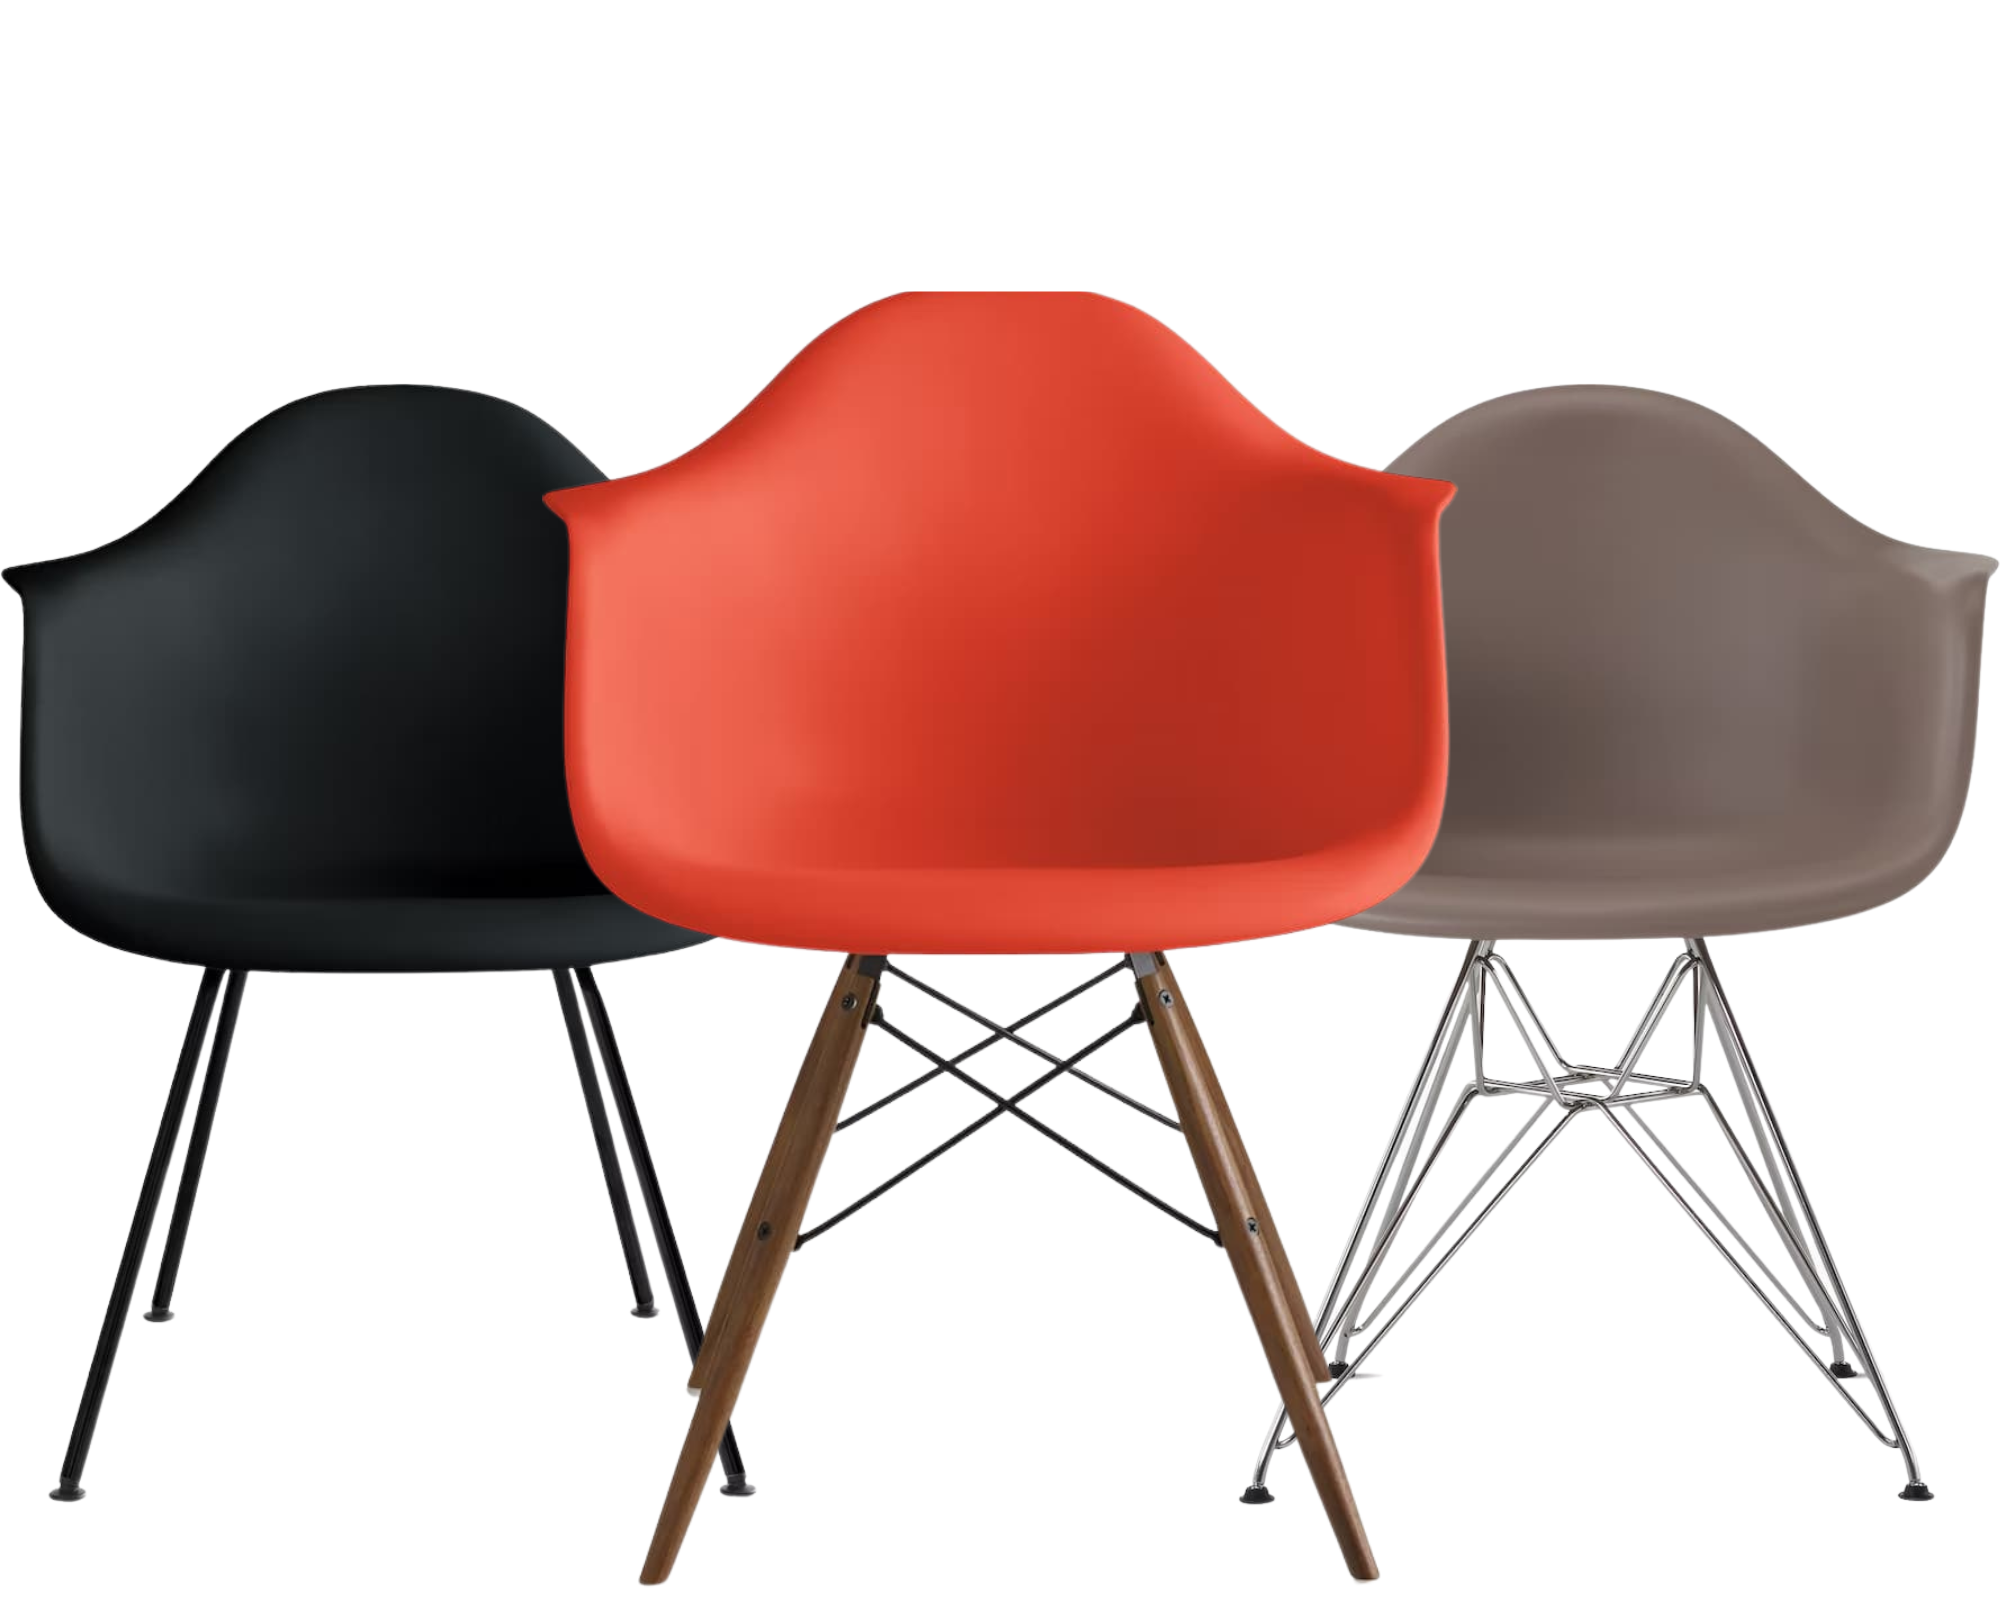 Eames Molded Plastic Chair Dining Room